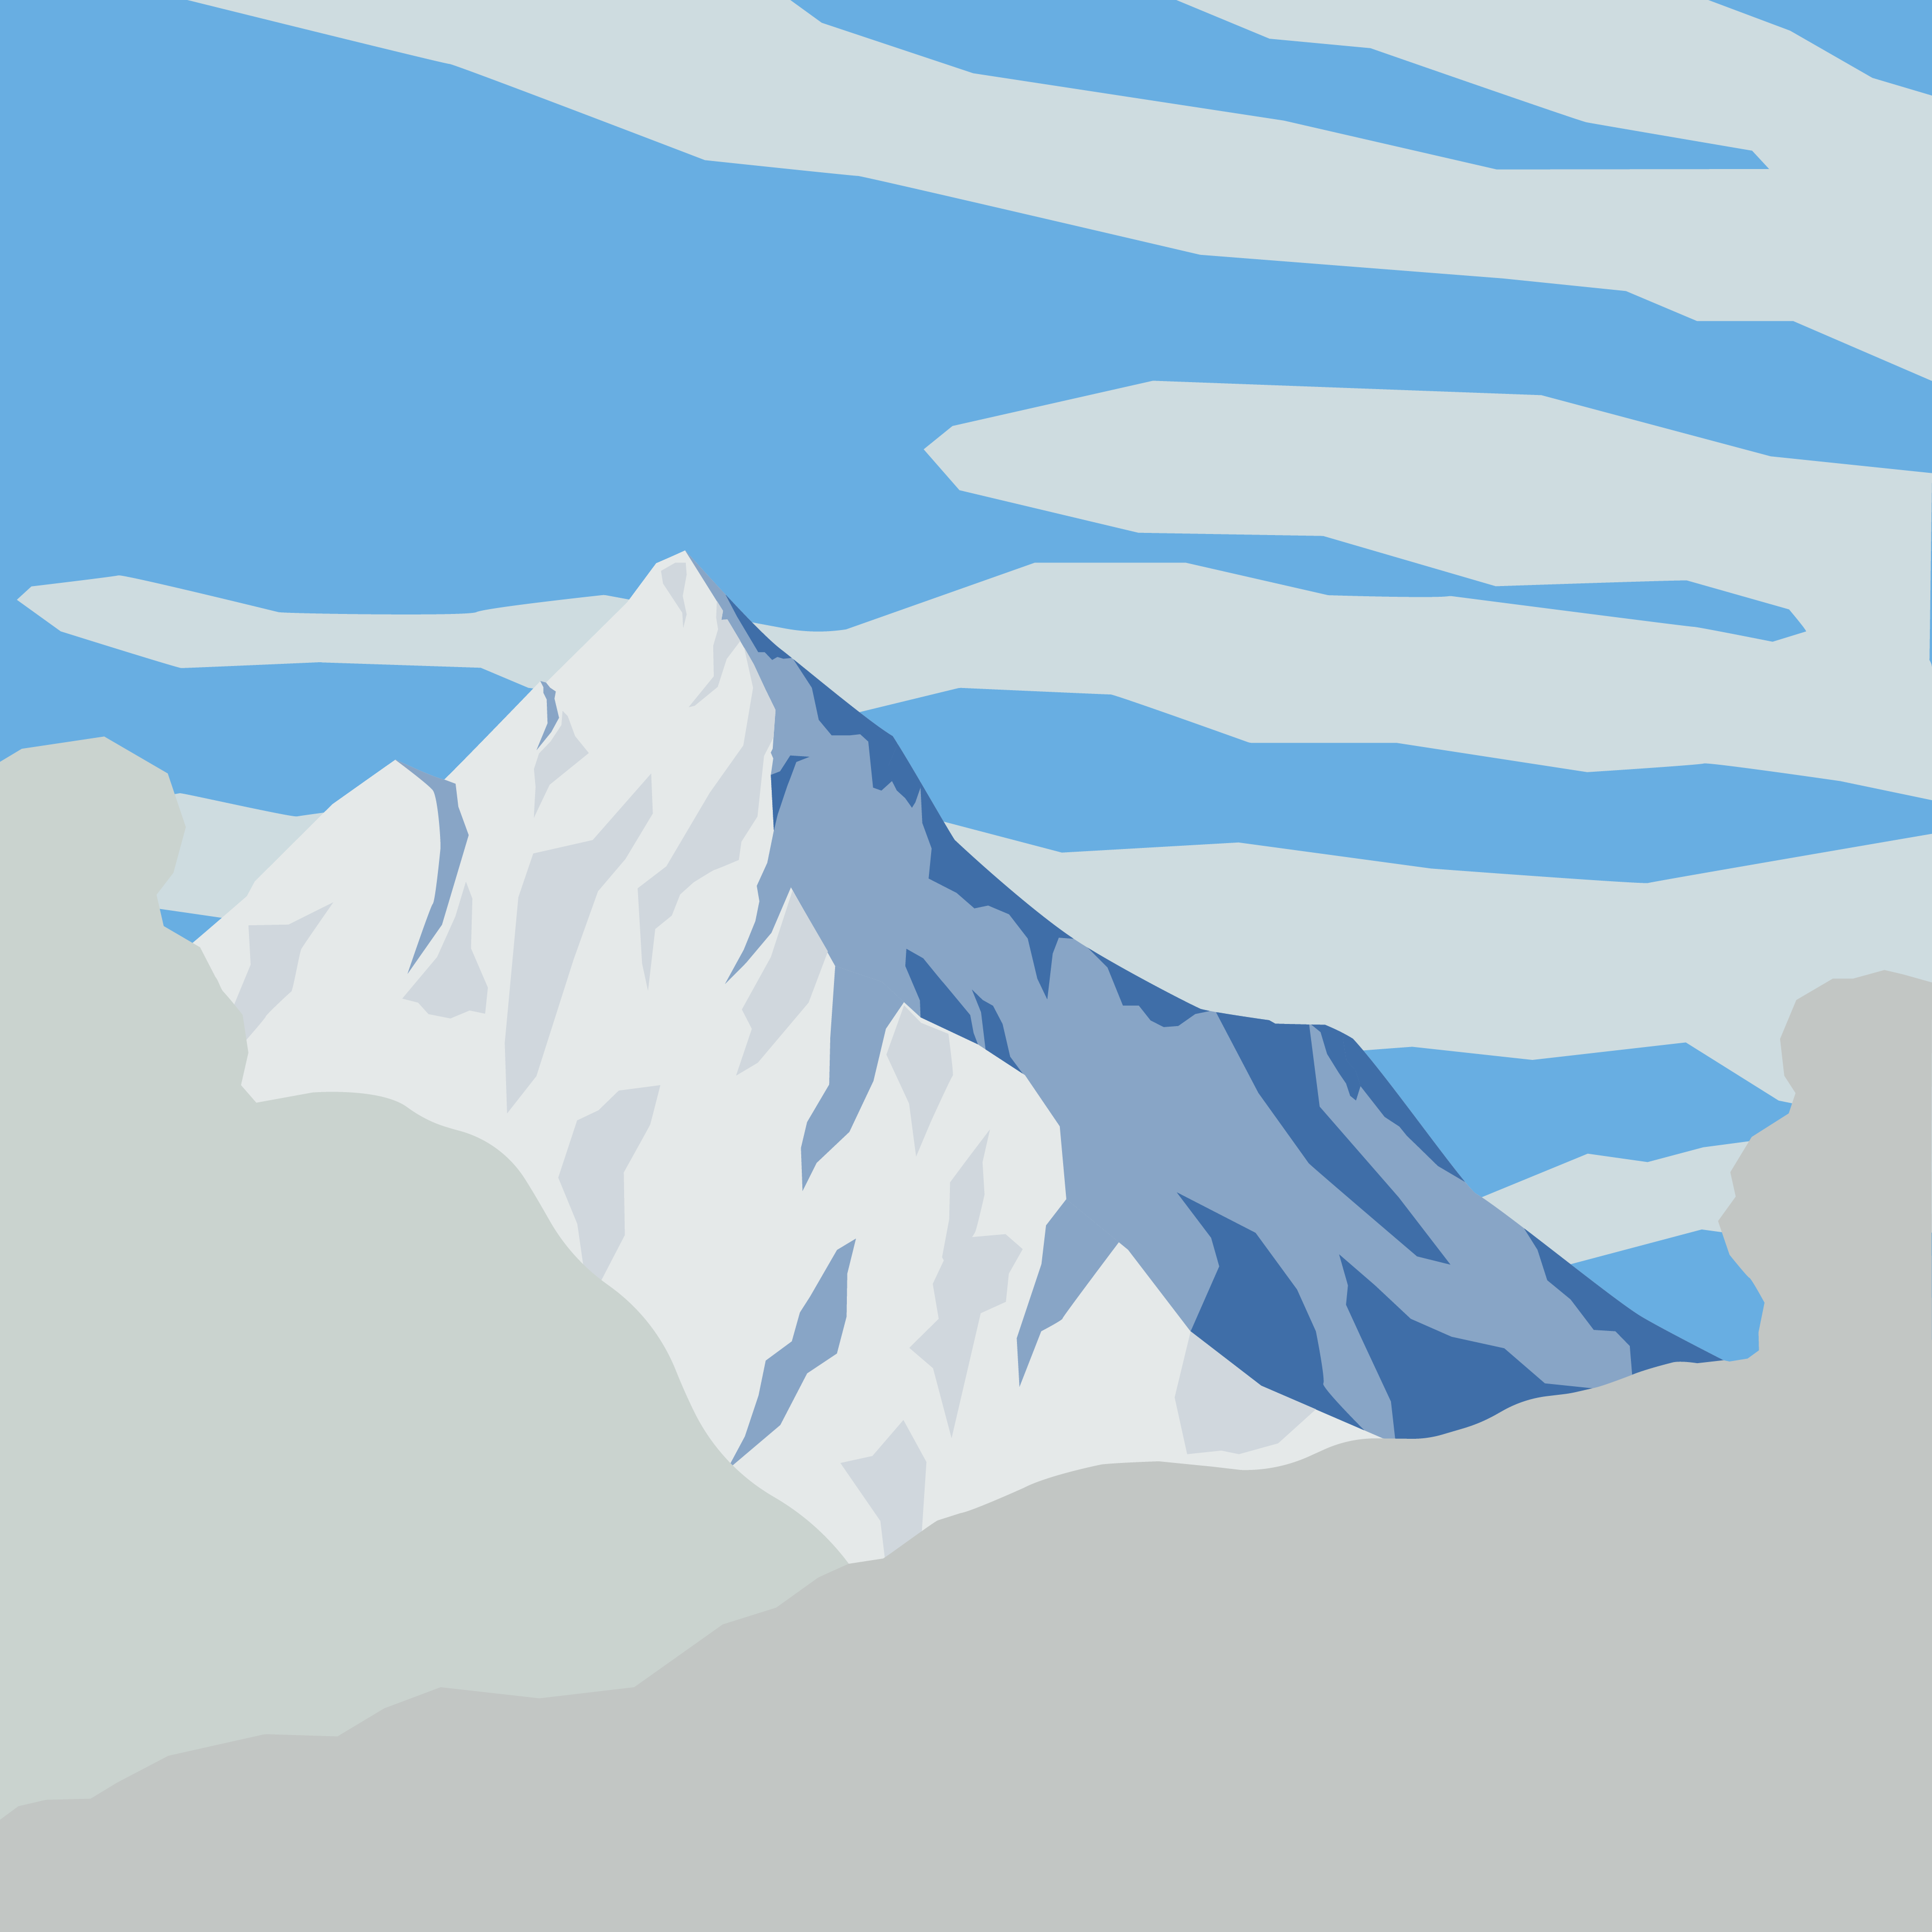 Winter views of Mont Charvin from Les Saisies. Minimalist illustration by Xavier Wendling.